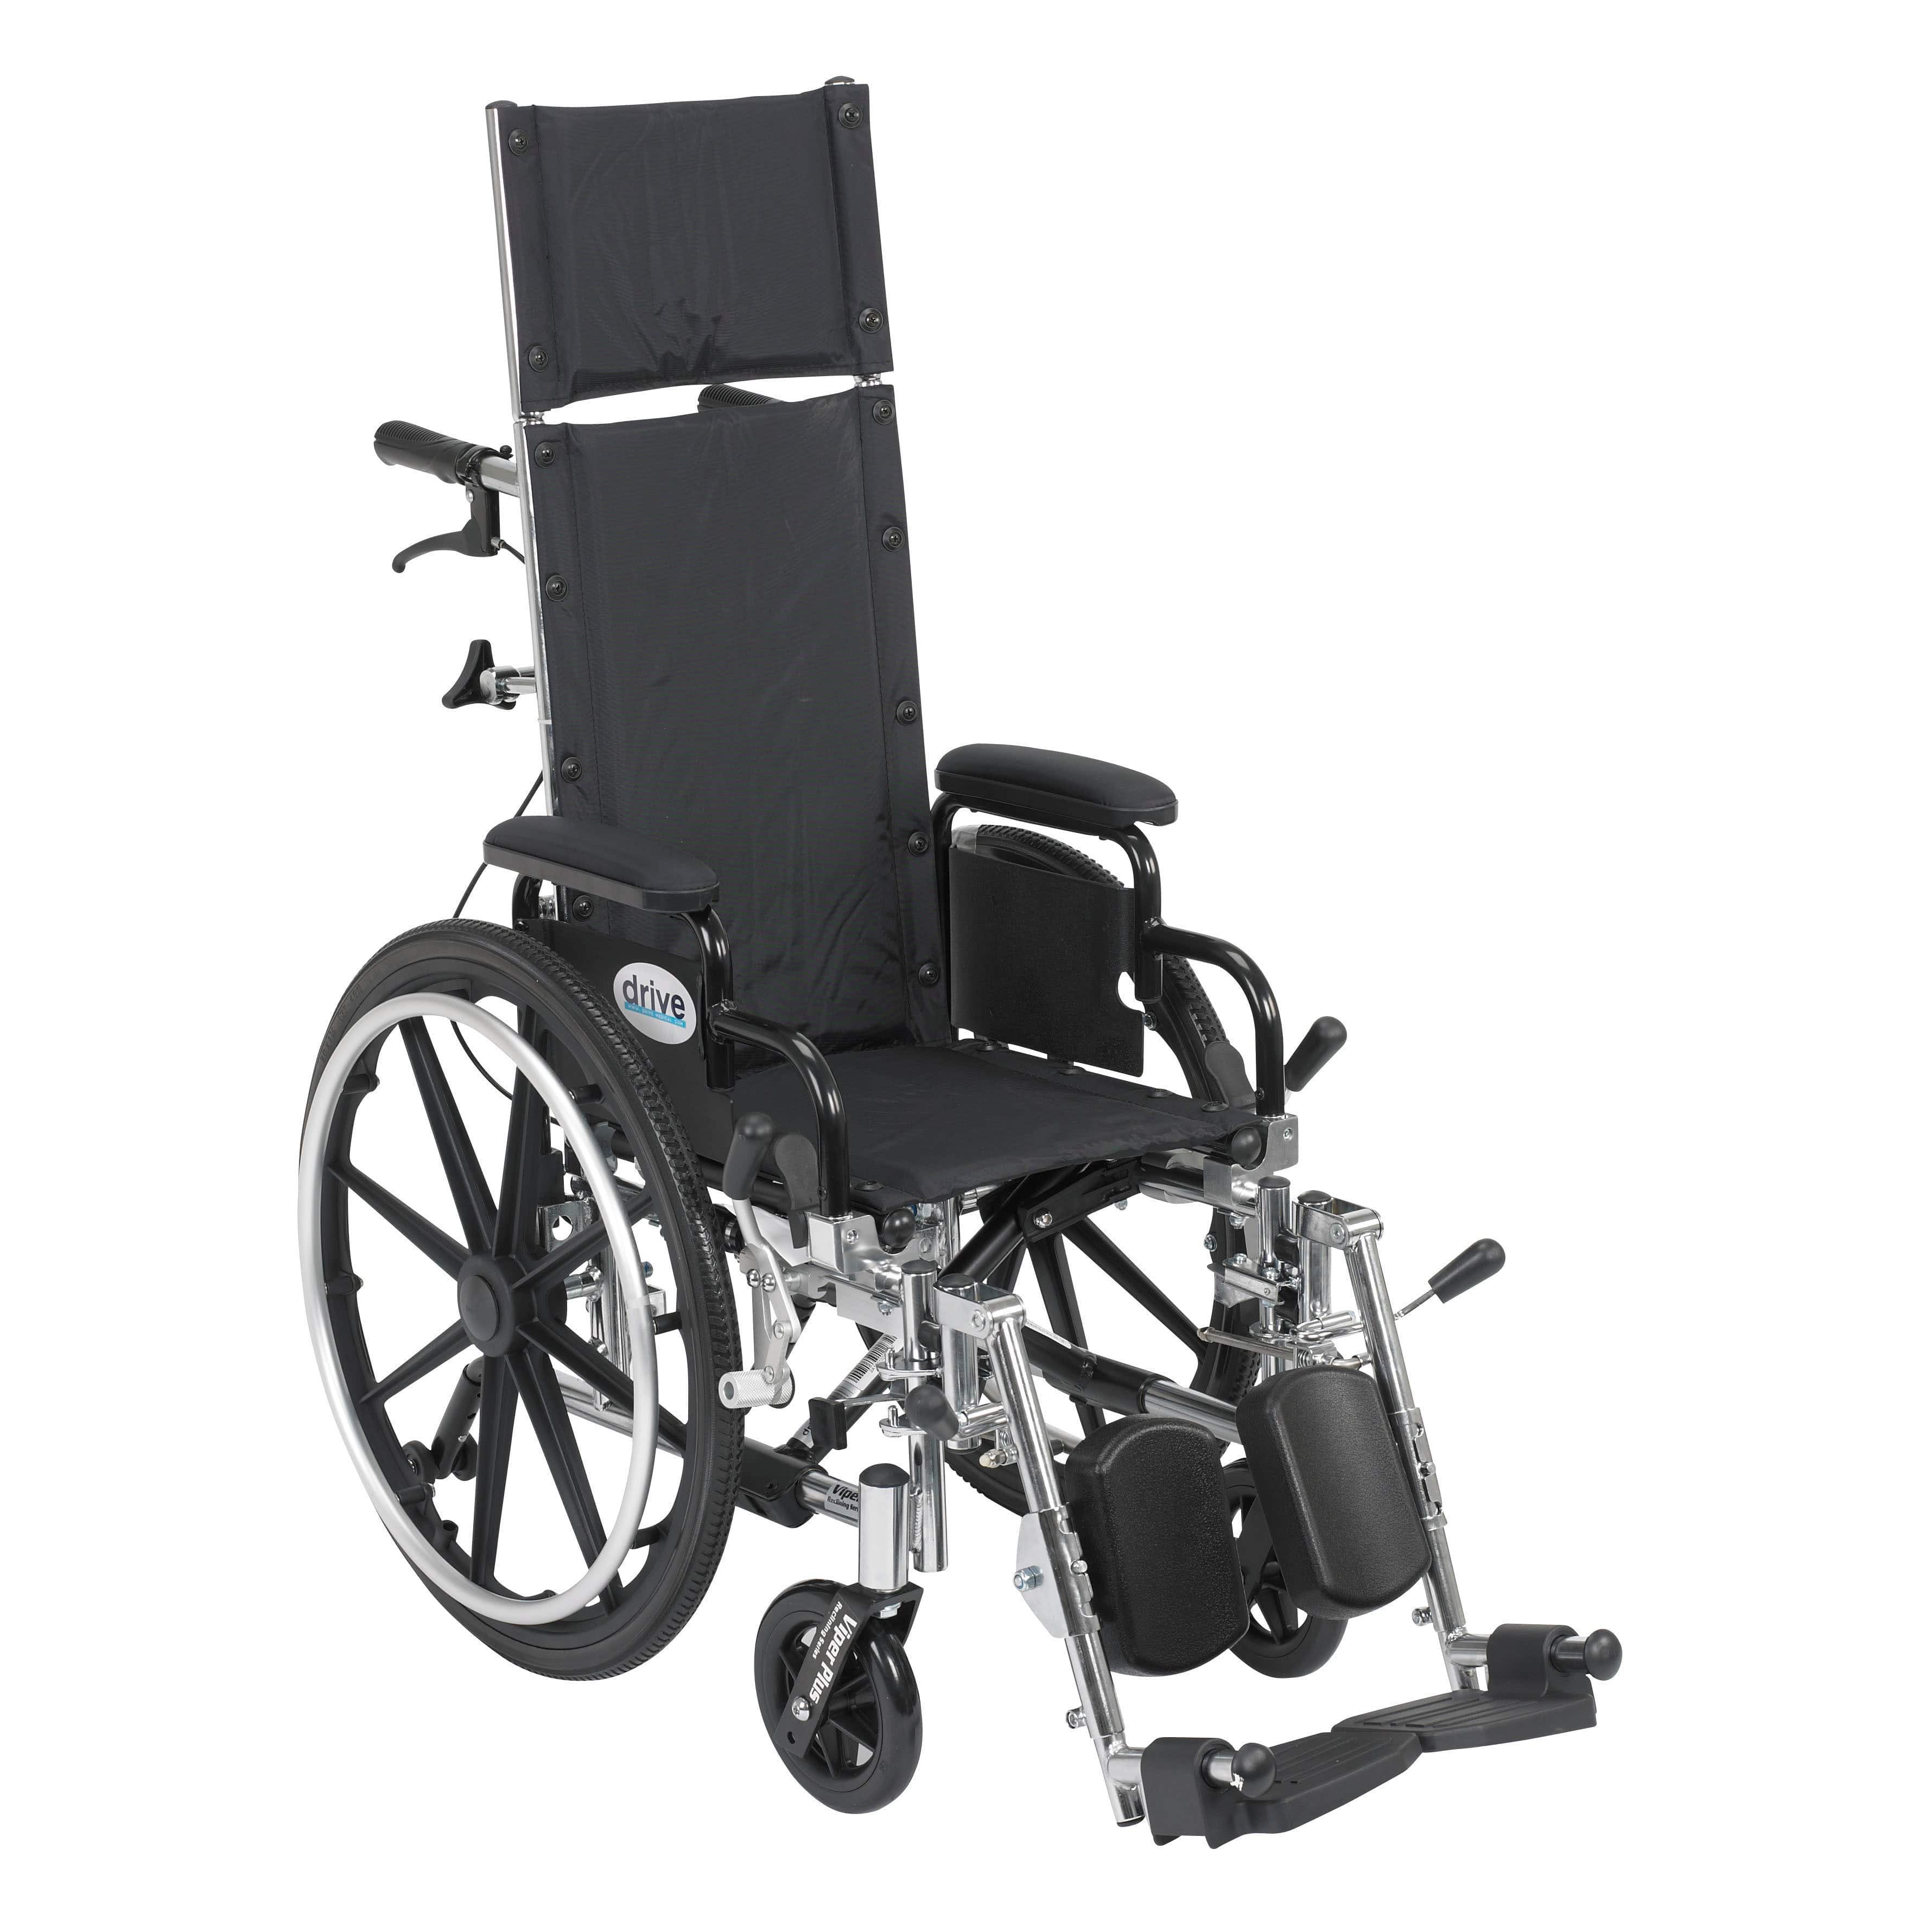 Drive Medical Wheelchairs 12" Seat Drive Medical Viper Plus Light Weight Reclining Wheelchair with Elevating Leg rest and Flip Back Detachable Arms